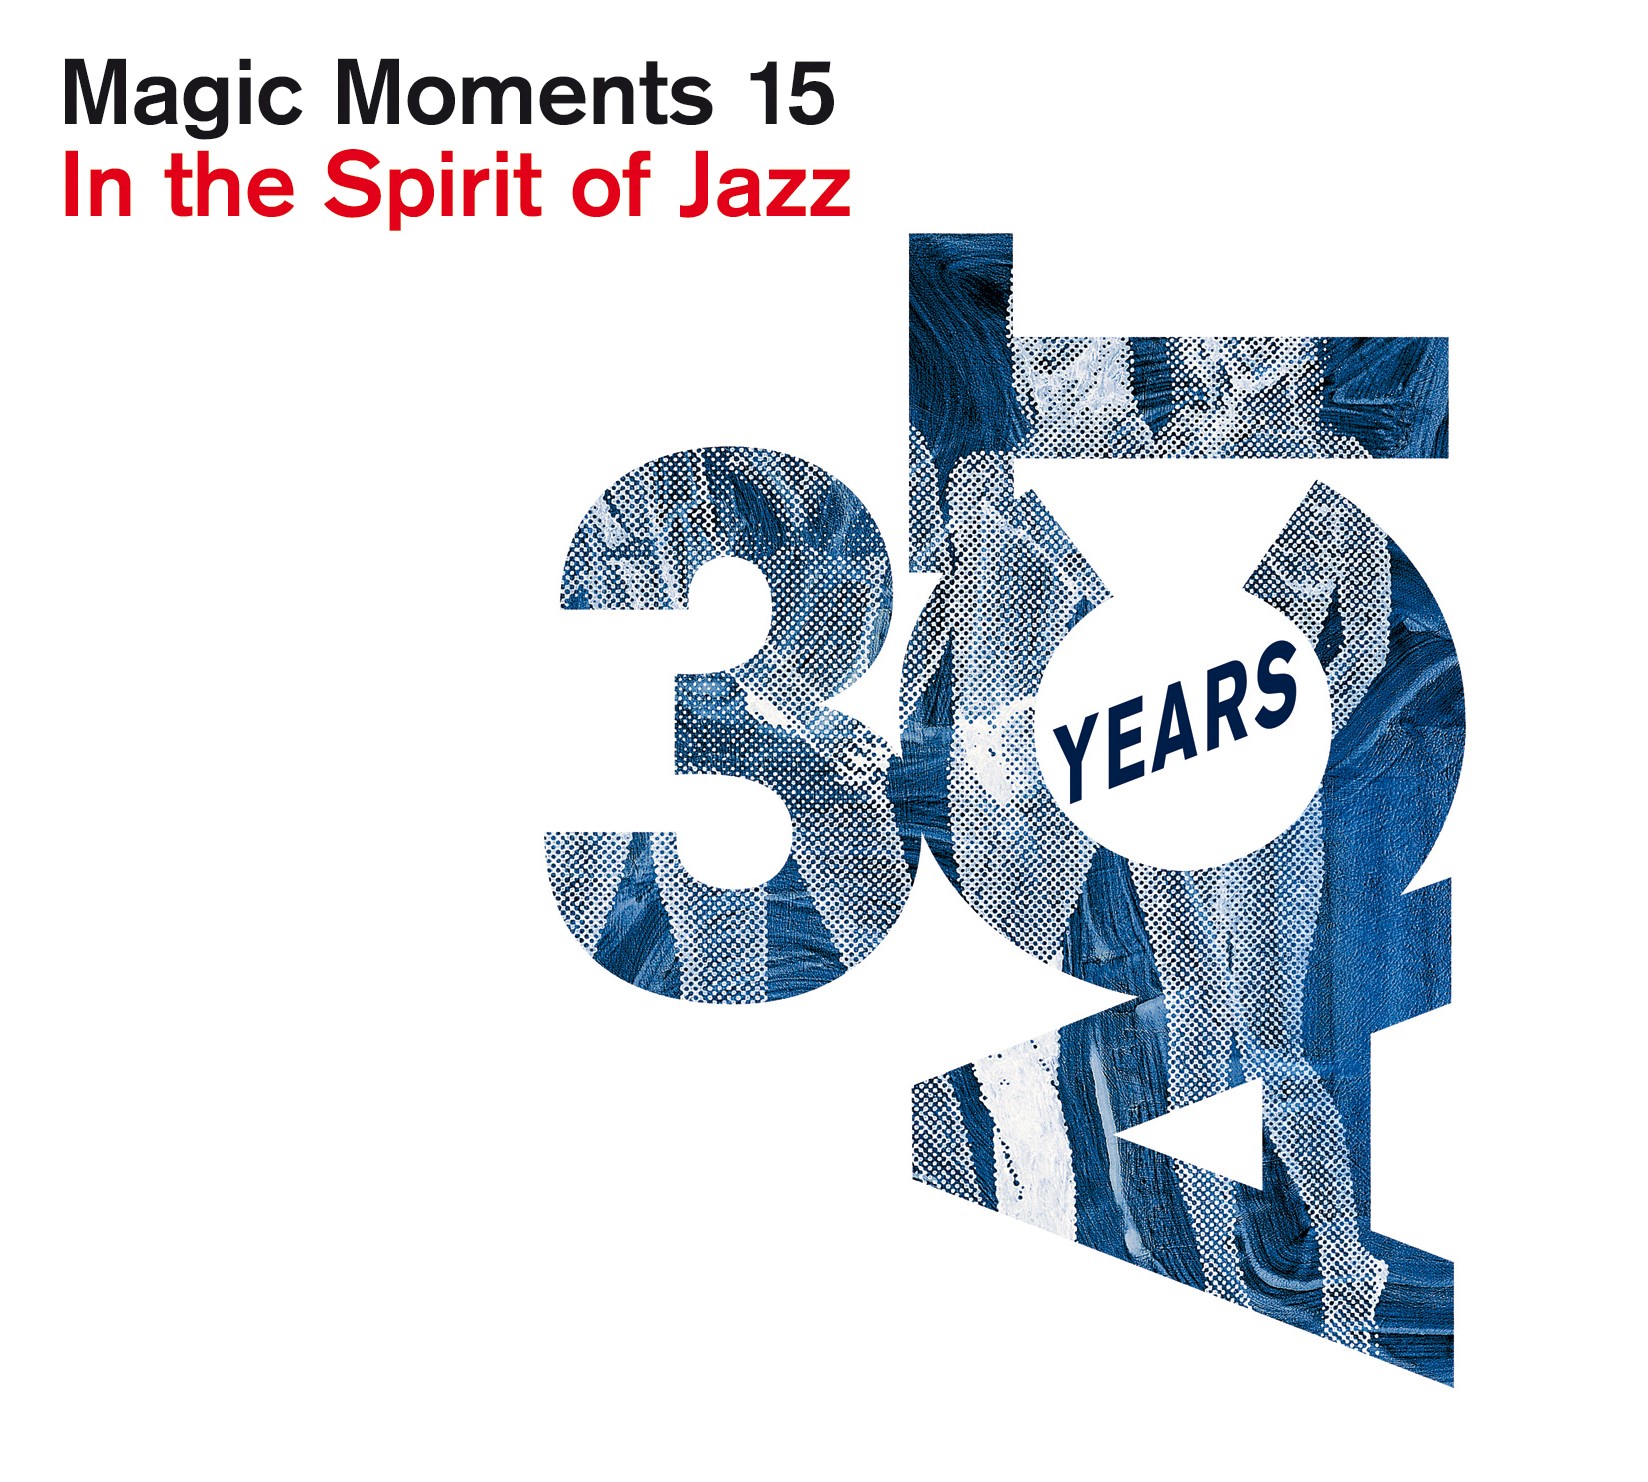 Magic Moments 15: In the Spirit of Jazz